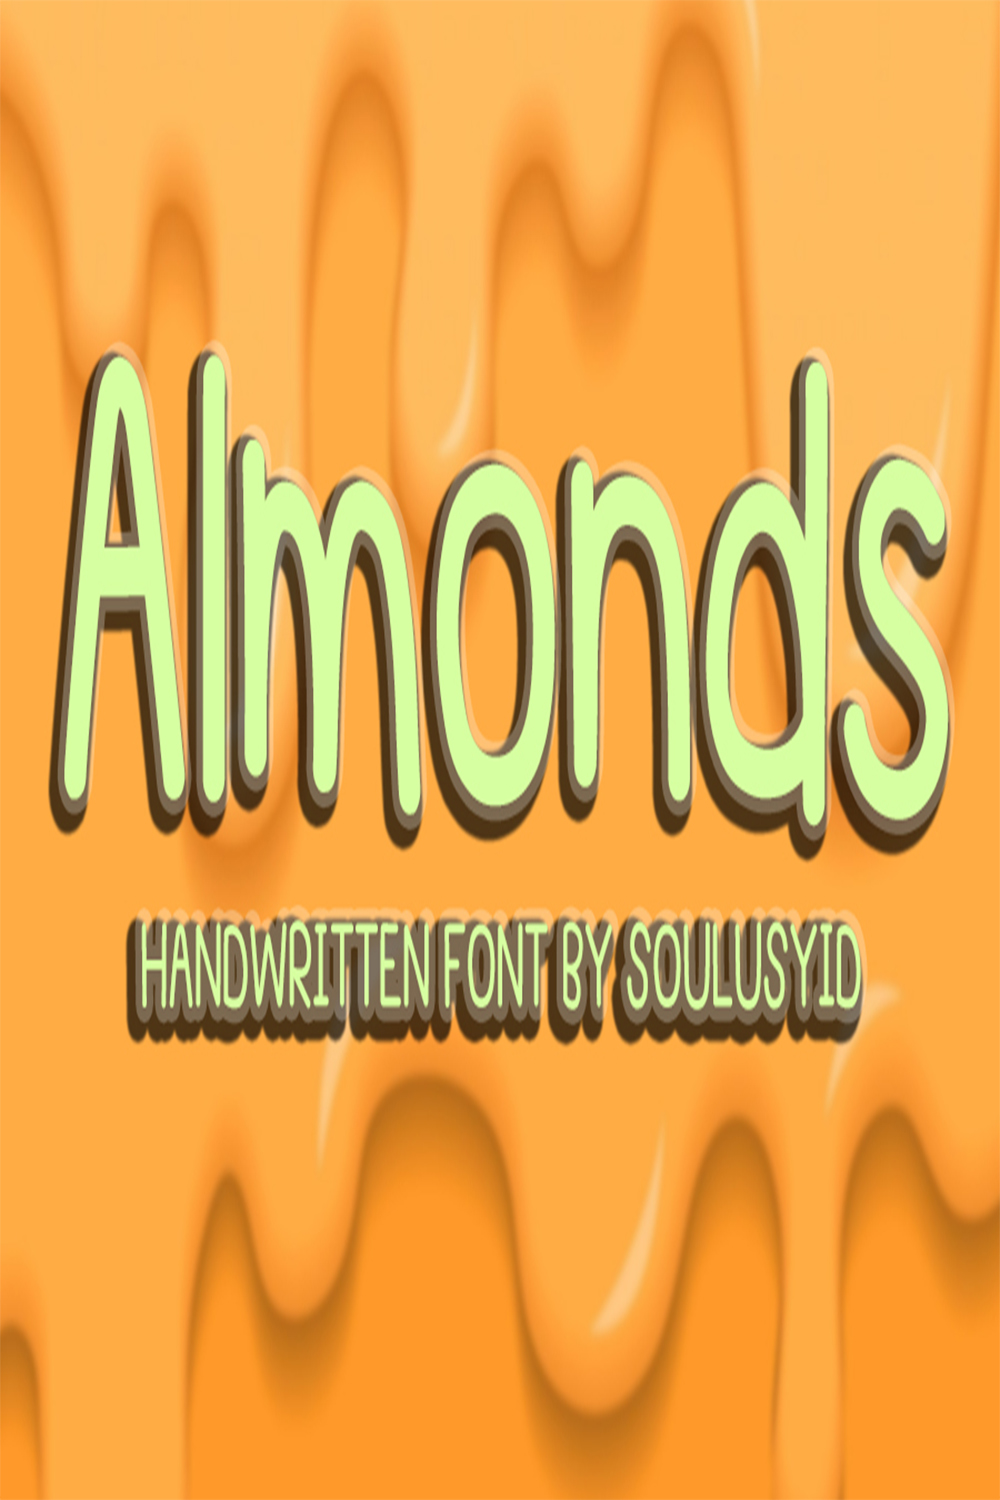 Almonds pinterest preview image.